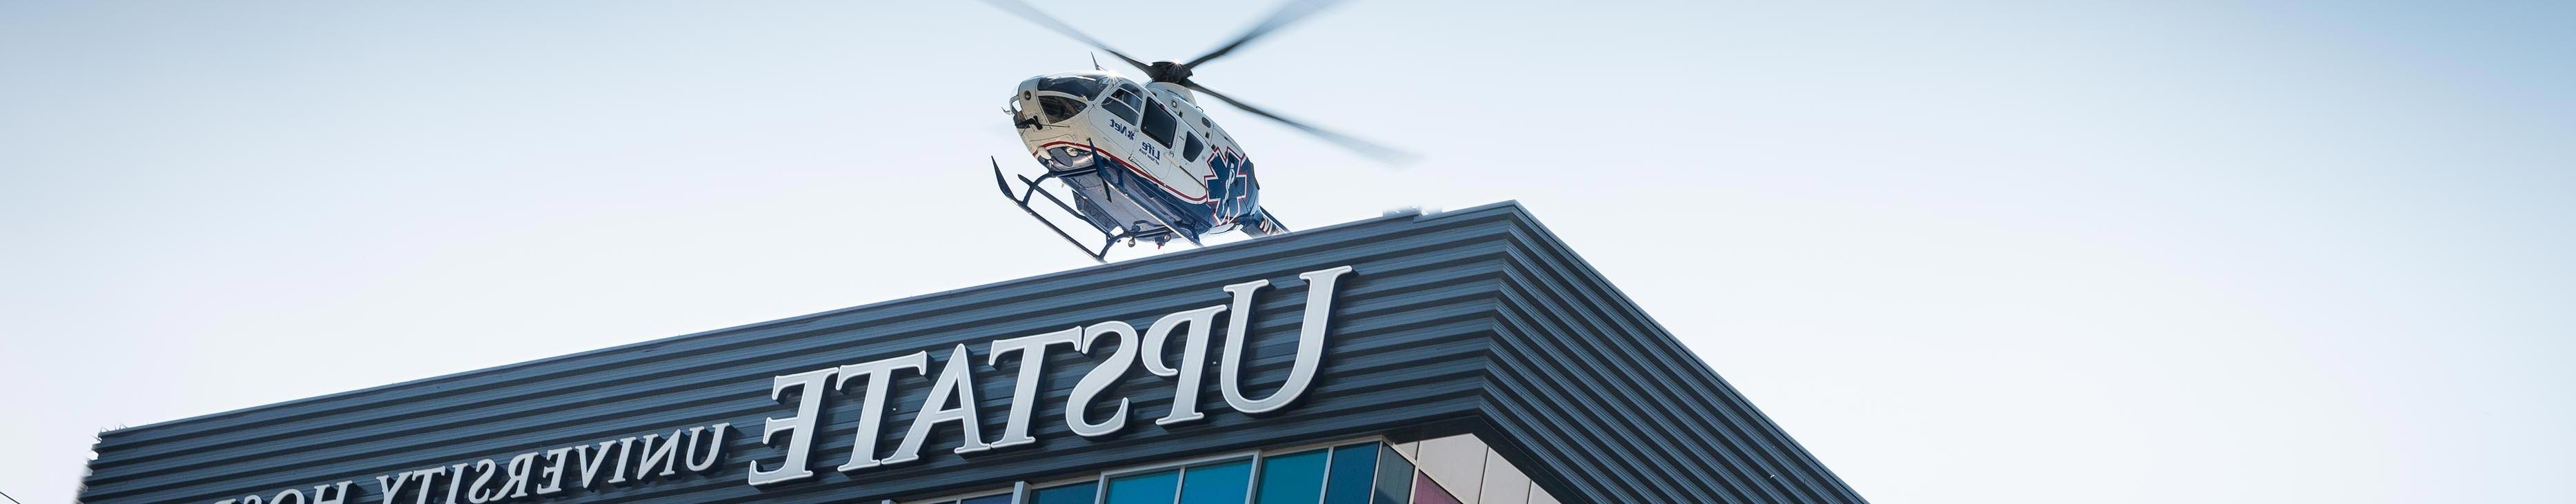 Helicopter arriving at Upstate University Hospital